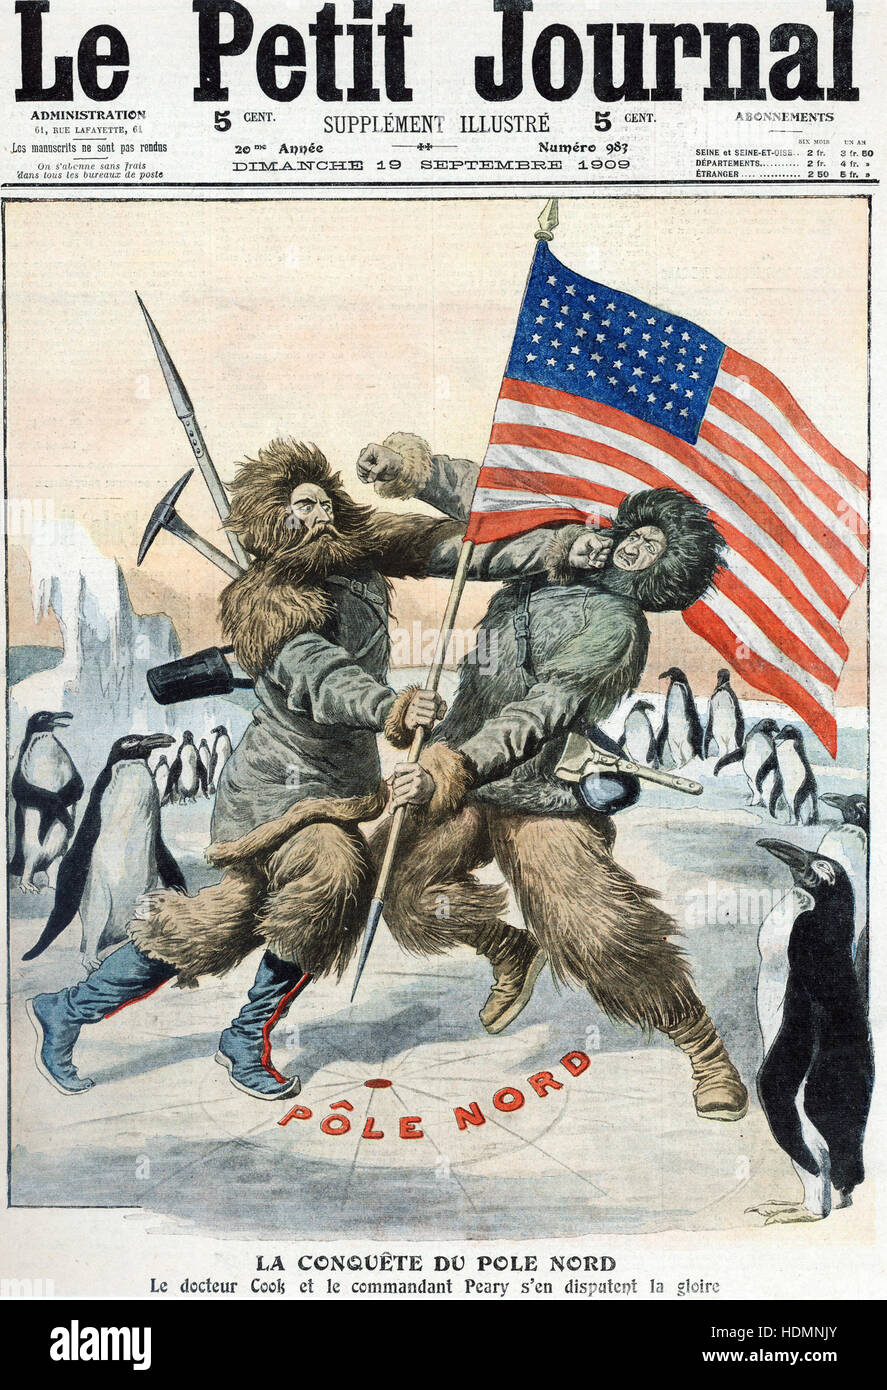 'Le Petit Journal', Paris, 1909 - Fight between R.E. Peary and F.A.Cook about the discovery of the North Pole Stock Photo